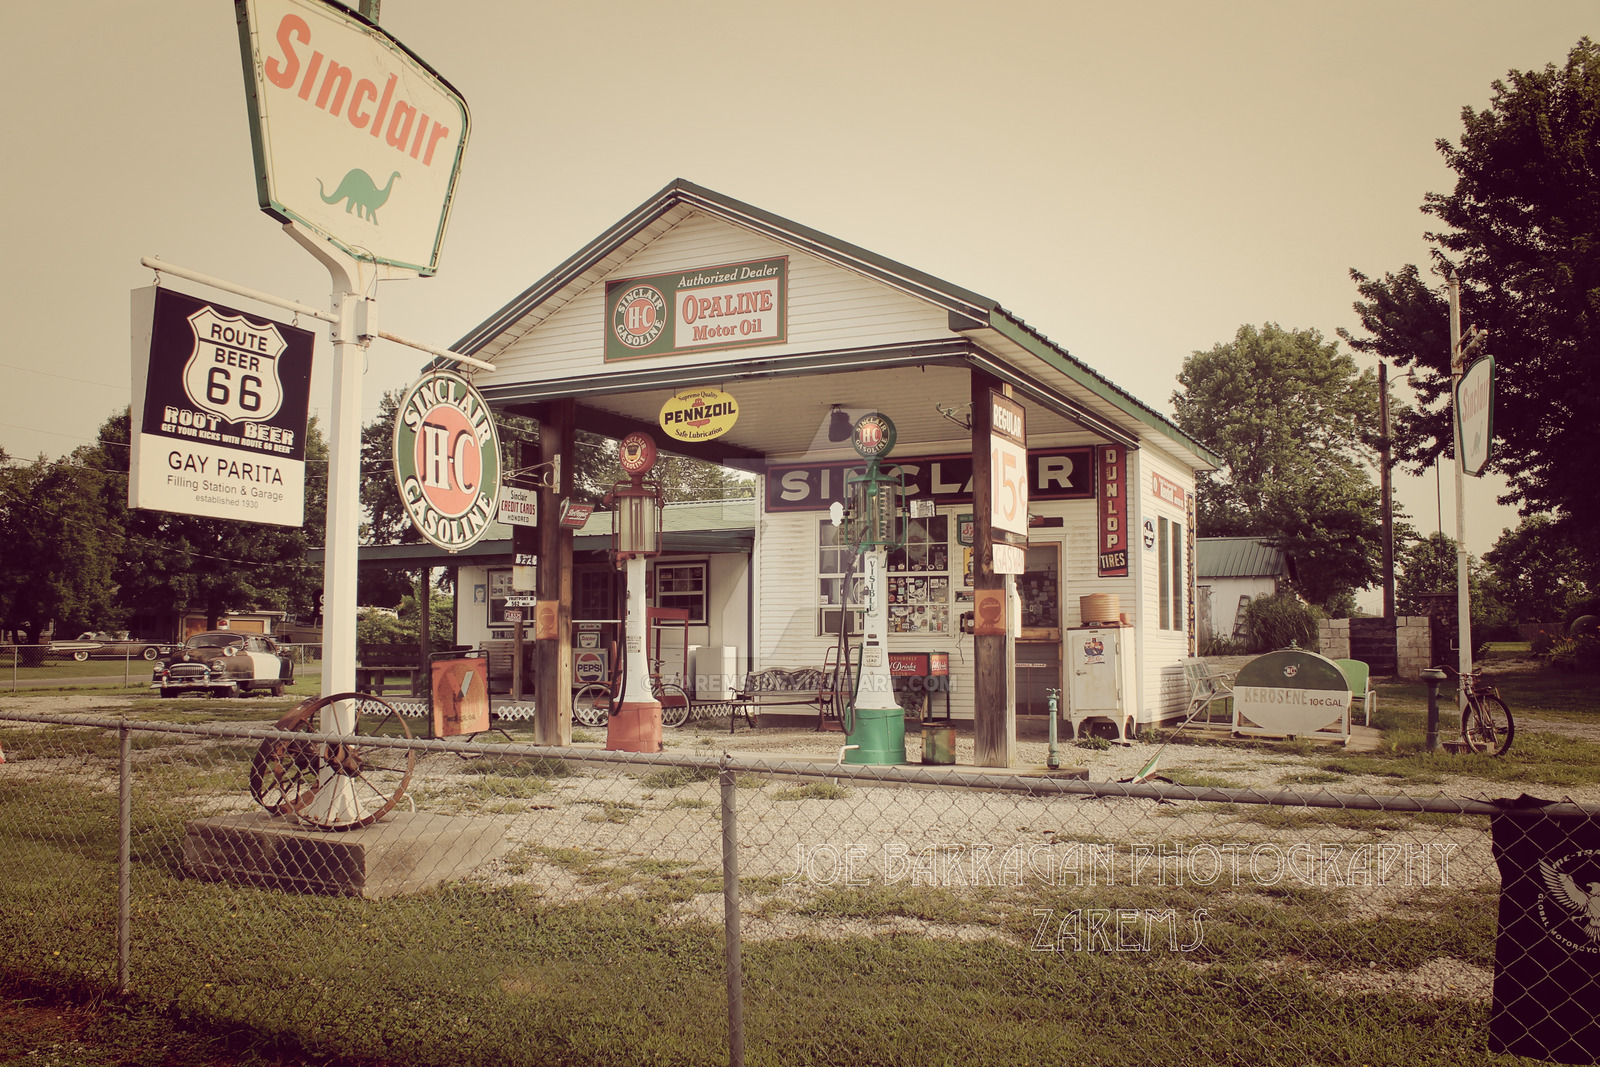 Free download Route 66 old gas station by Zarems [1600x1067] for your Desktop, Mobile & Tablet. Explore Buy Route 66 Wallpaper Border. Route 66 Wallpaper Vintage, Route 66 Wallpaper for Walls, Corvette Wallpaper Border